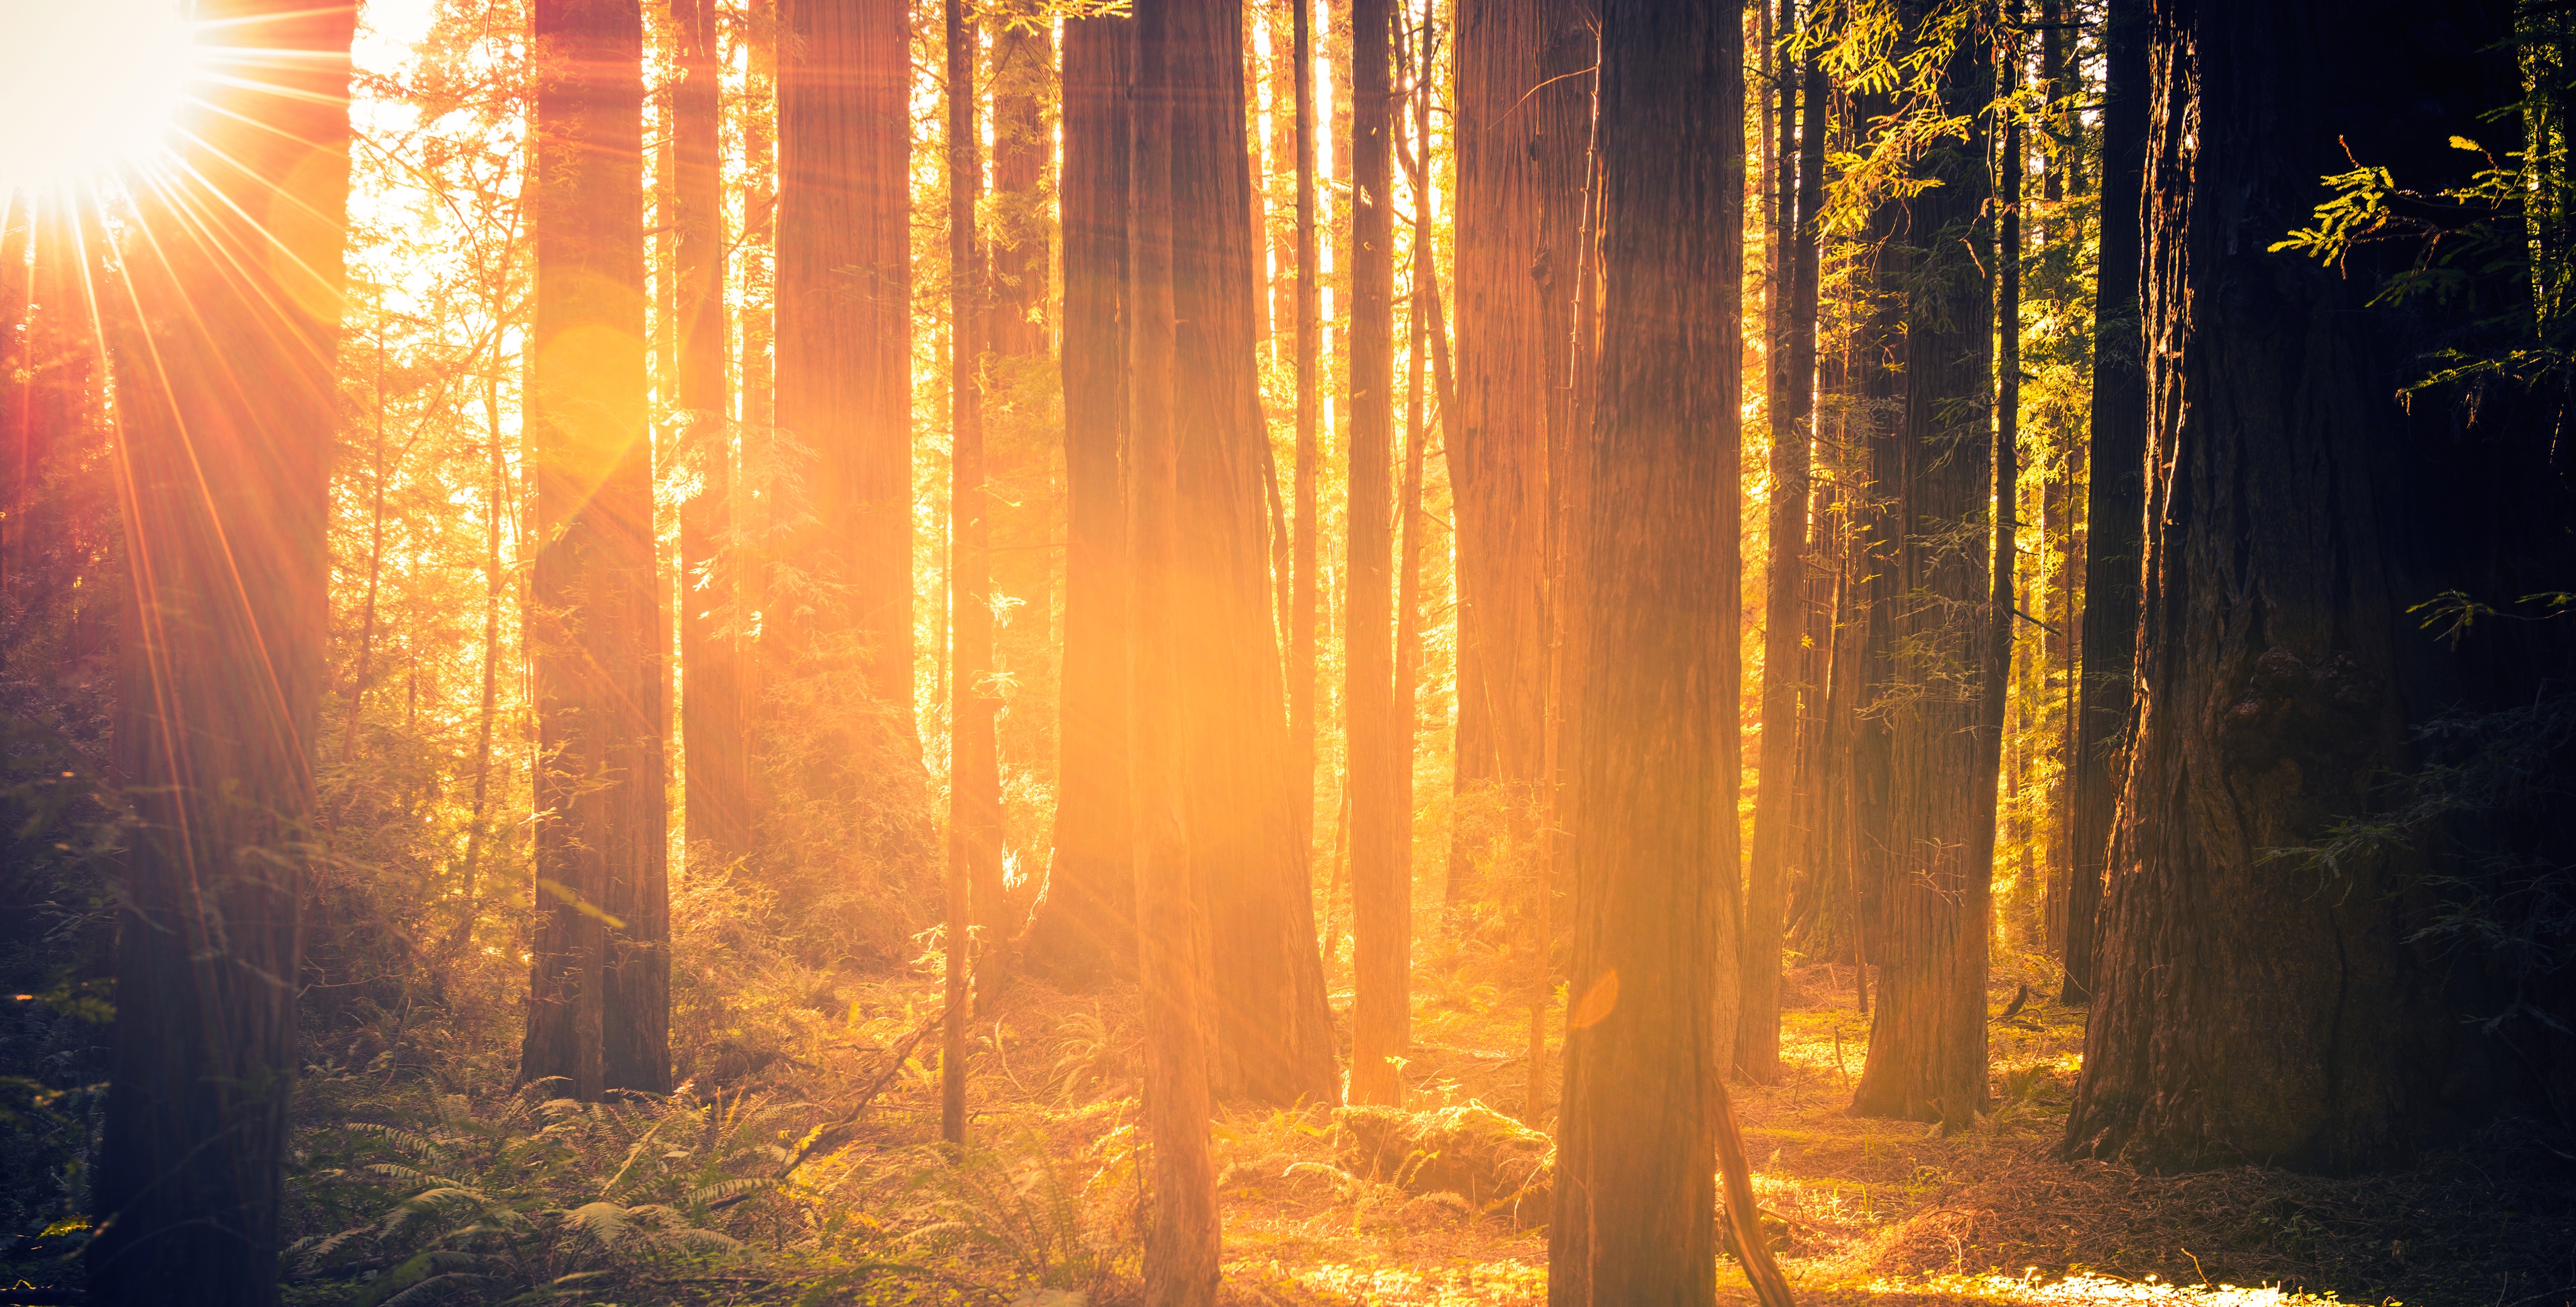 Redwood Forest Scenery. Summer Sunset in the Forest. California, USA.